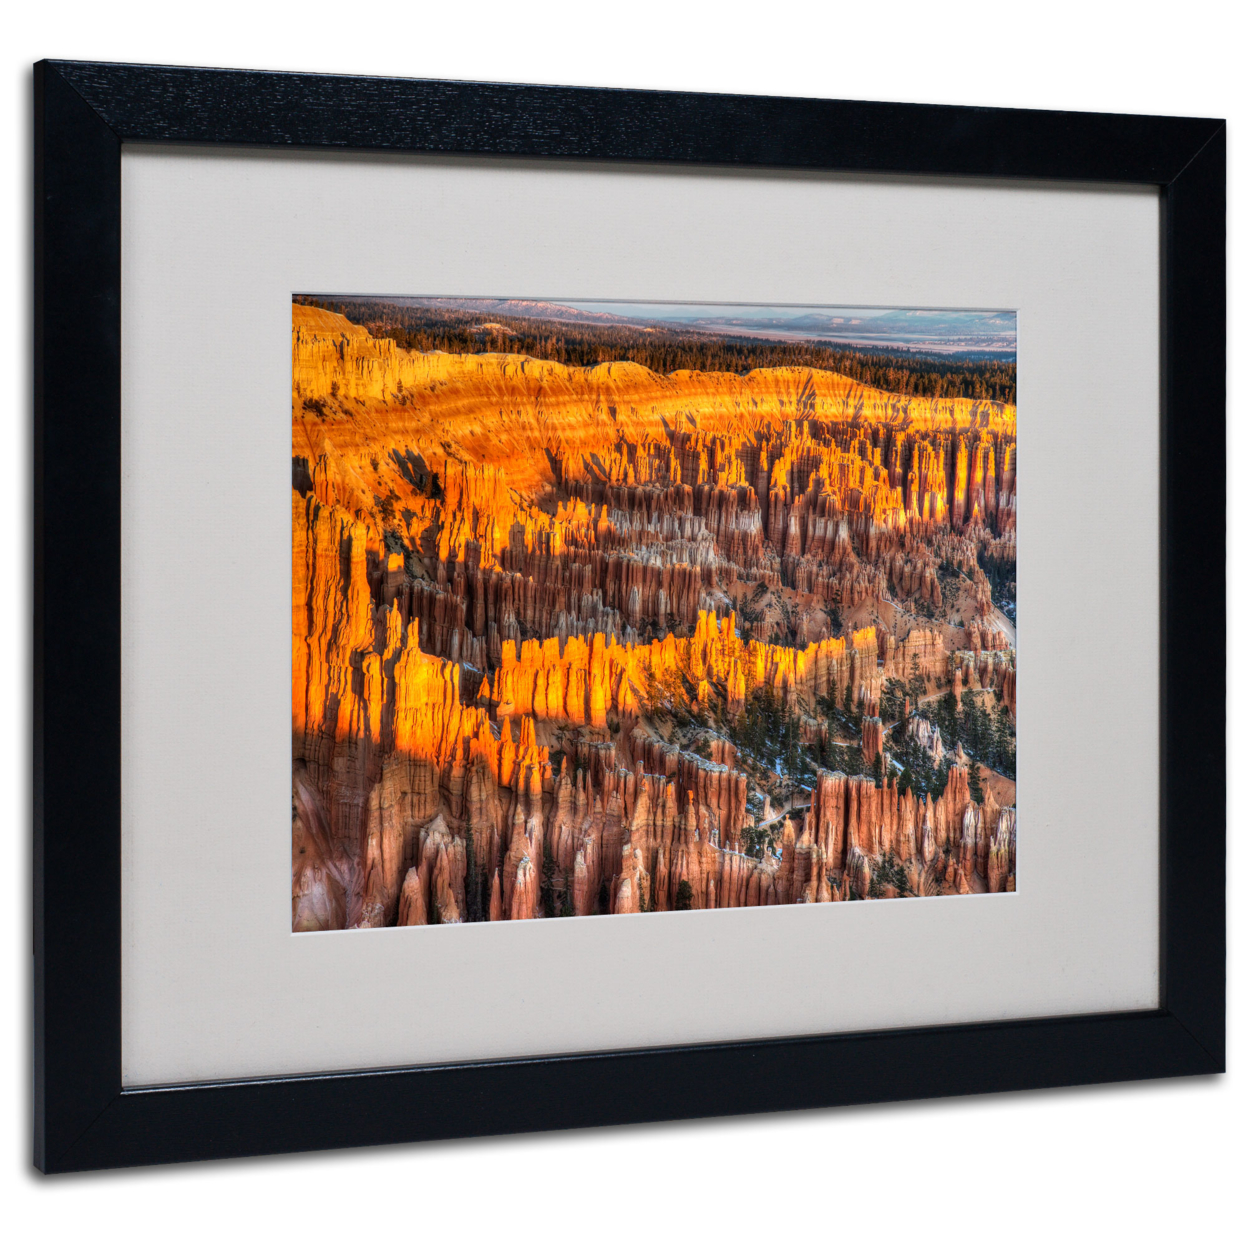 Pierre Leclerc 'Bryce Canyon Sunrise' Black Wooden Framed Art 18 X 22 Inches